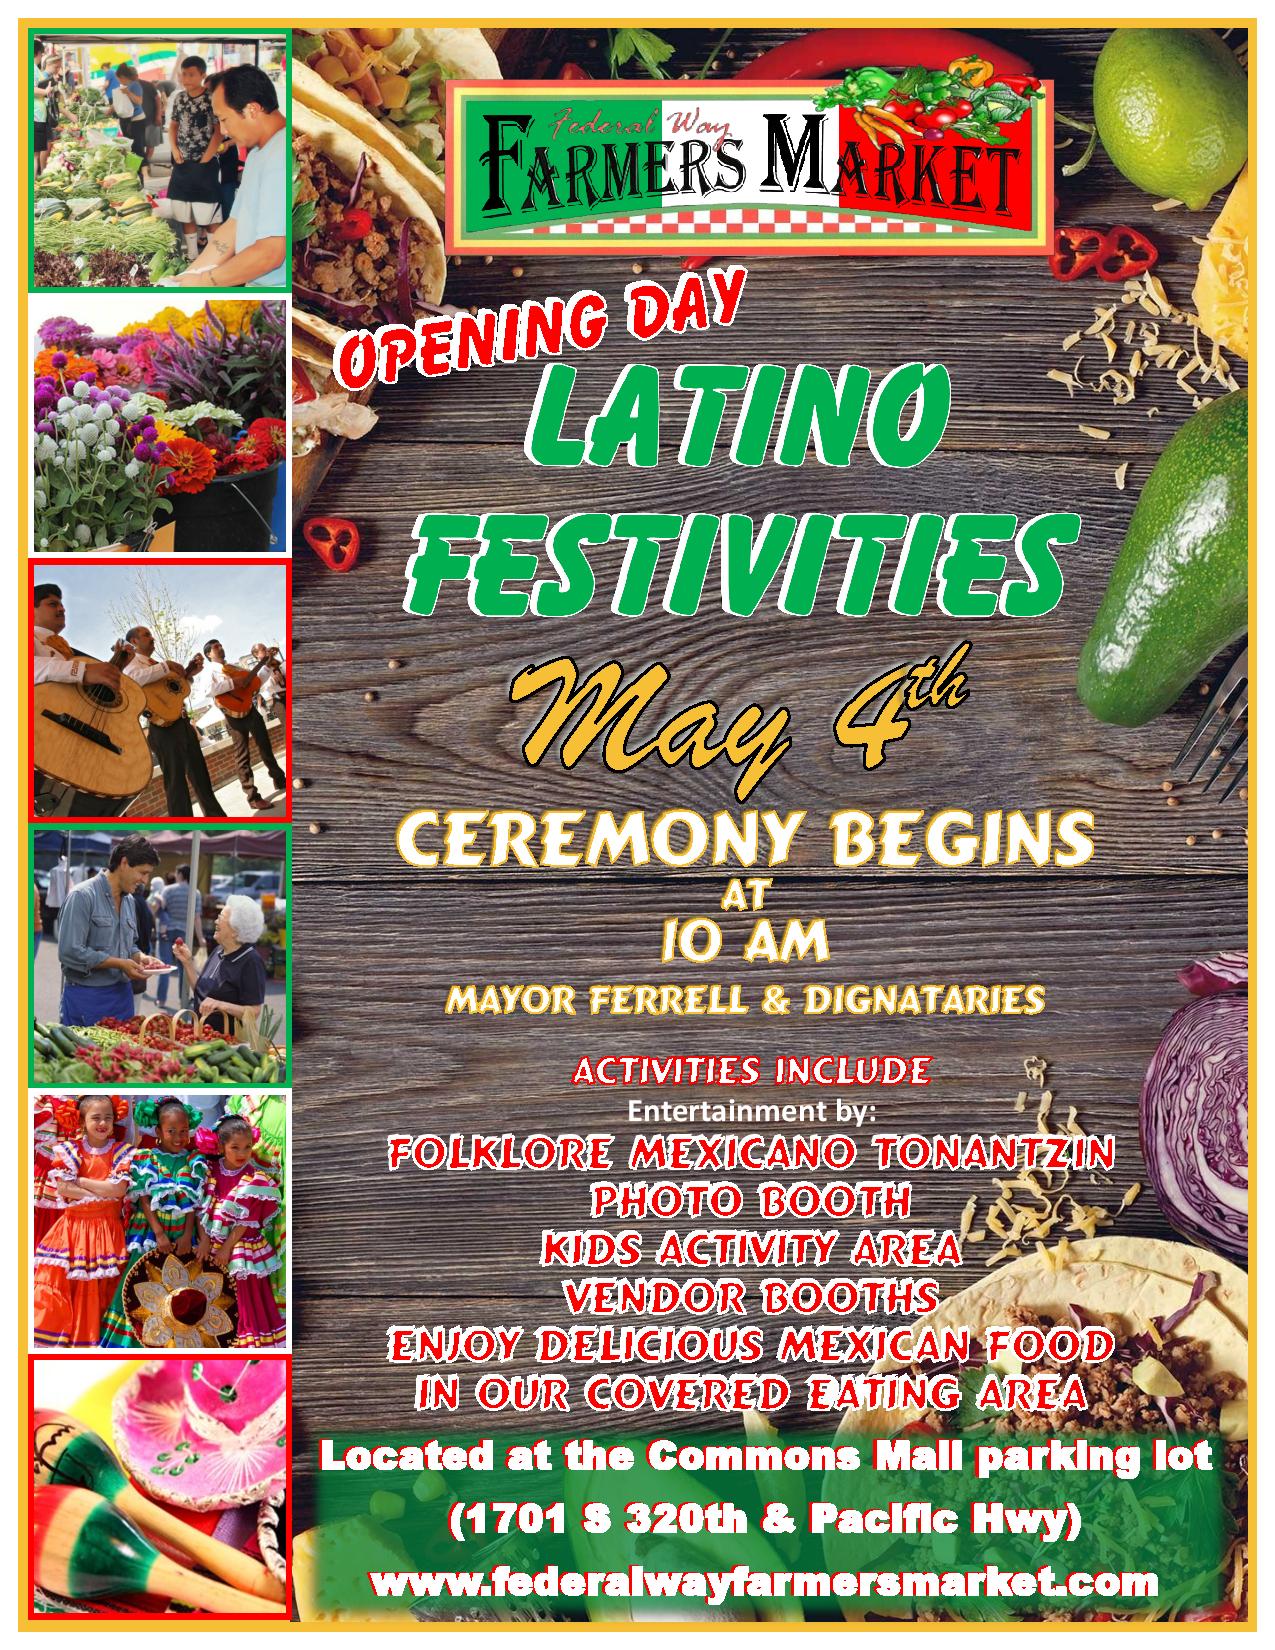 Federal Way Farmers Market 2019 Opening Day: Latino Festivities